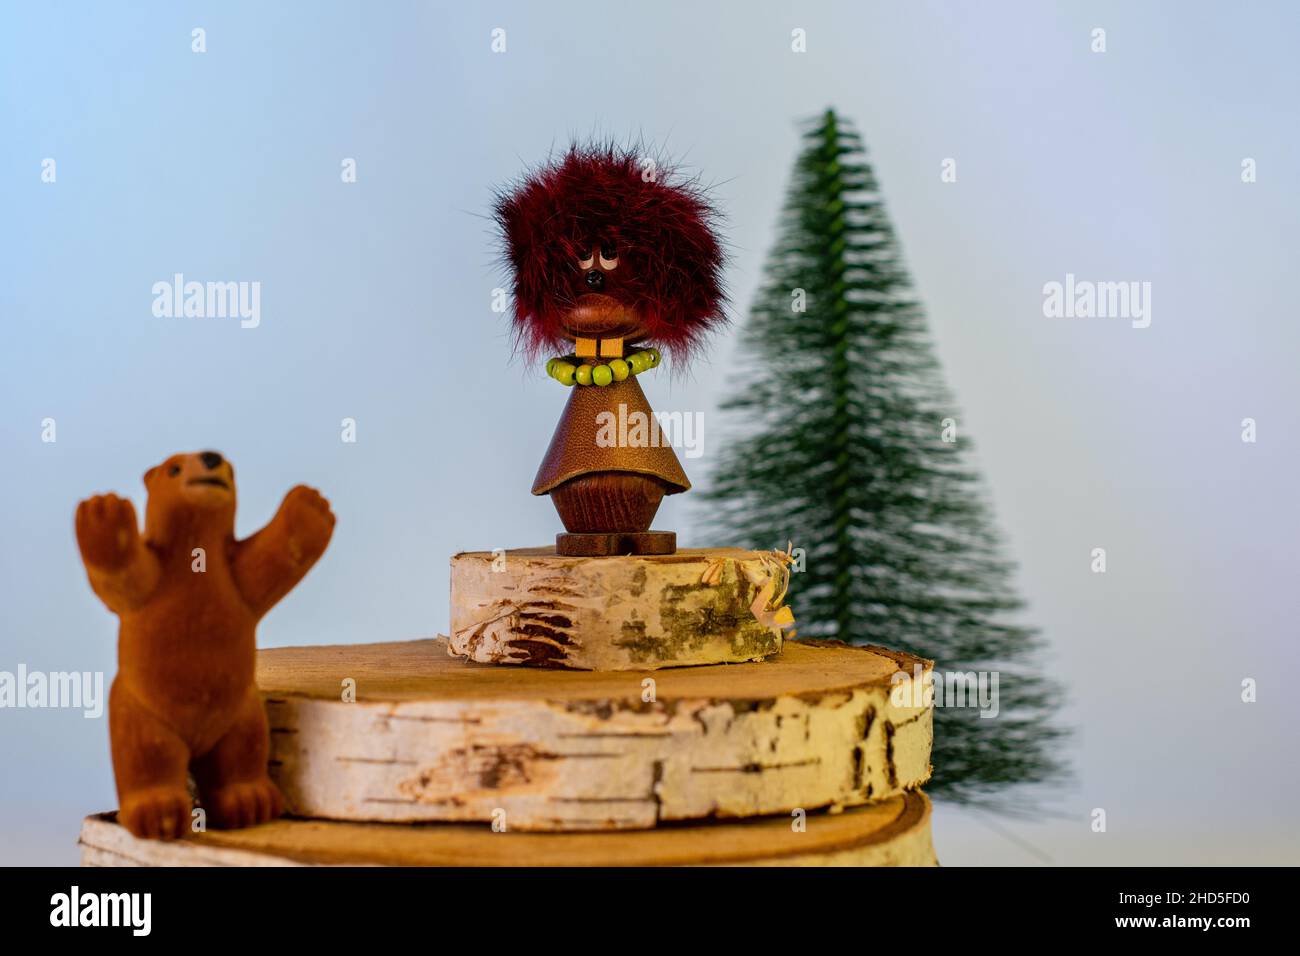 Manikin toy with bear and fir tree Stock Photo